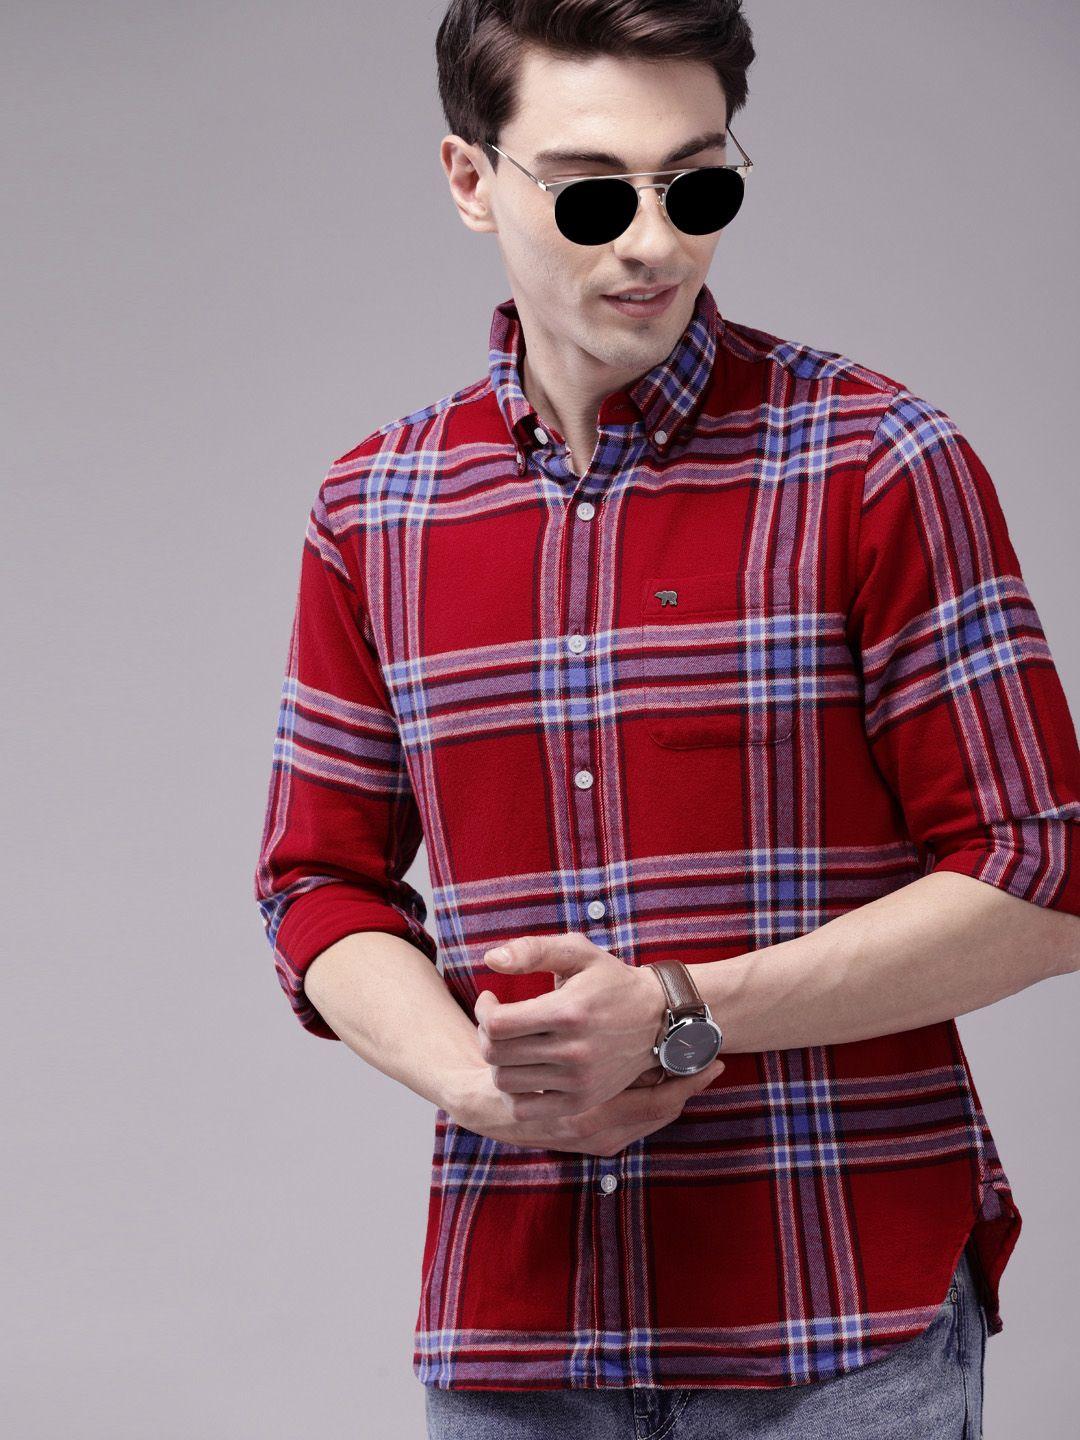 the-bear-house-men-red-slim-fit-windowpane-checks-opaque-checked-casual-shirt